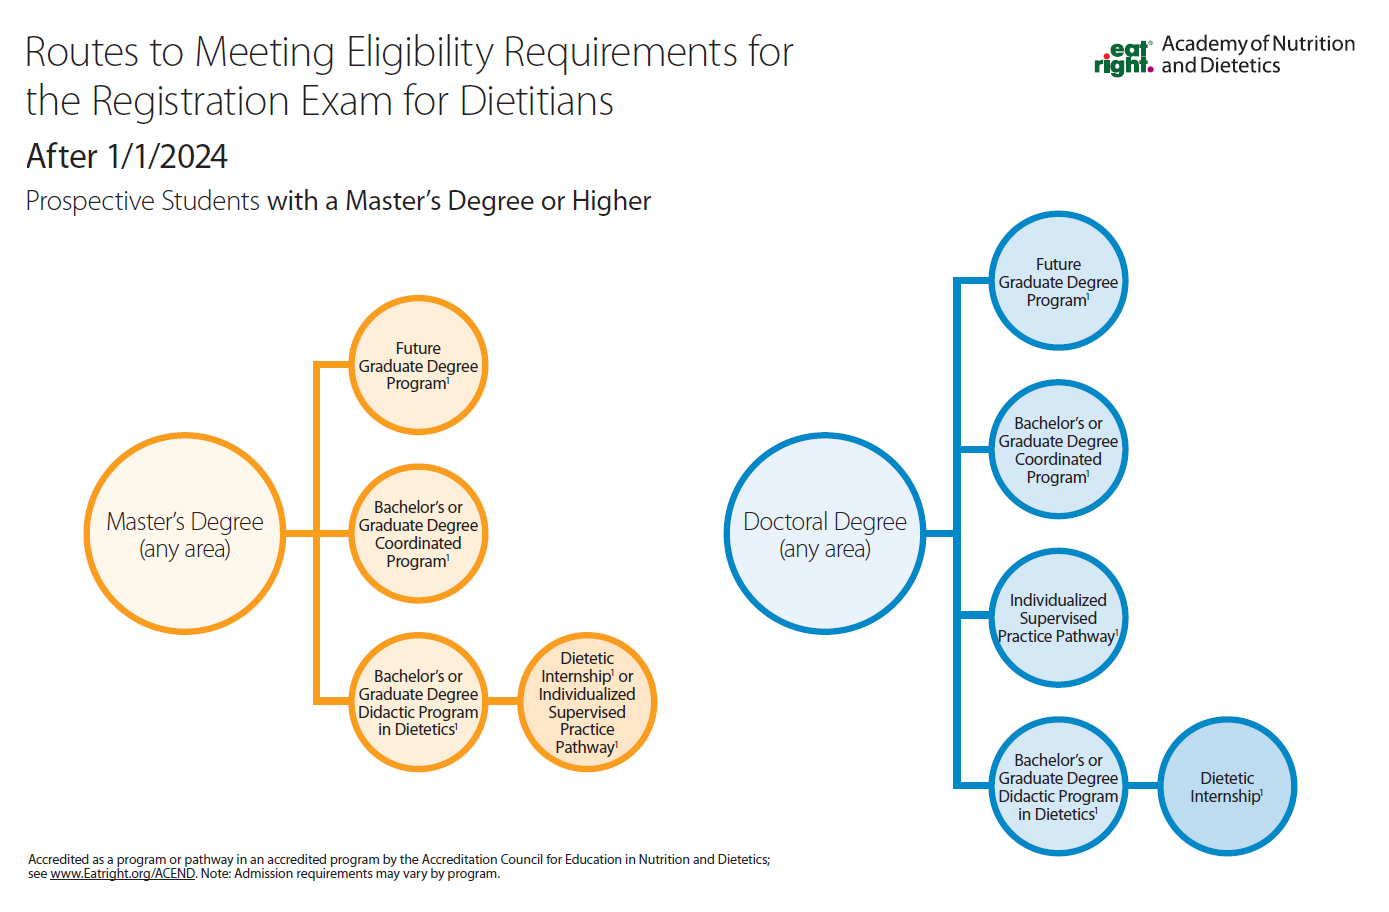 routes to meeting eligibility requirements after 1/1/2024 for prospective students with a master's degree or higher